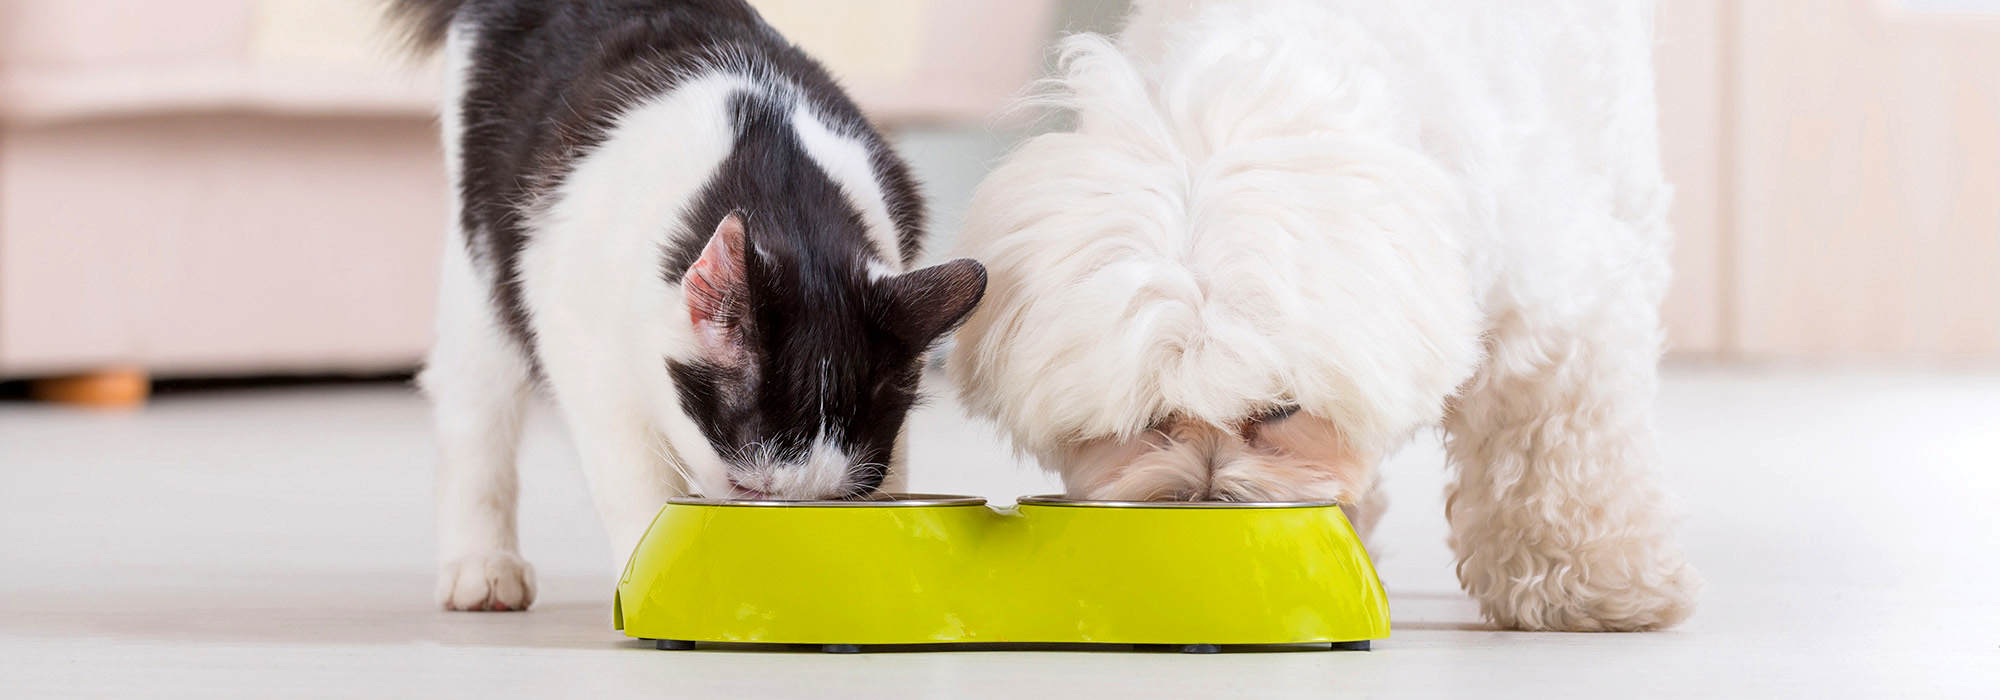 A dog and a cat eating out of a bowl